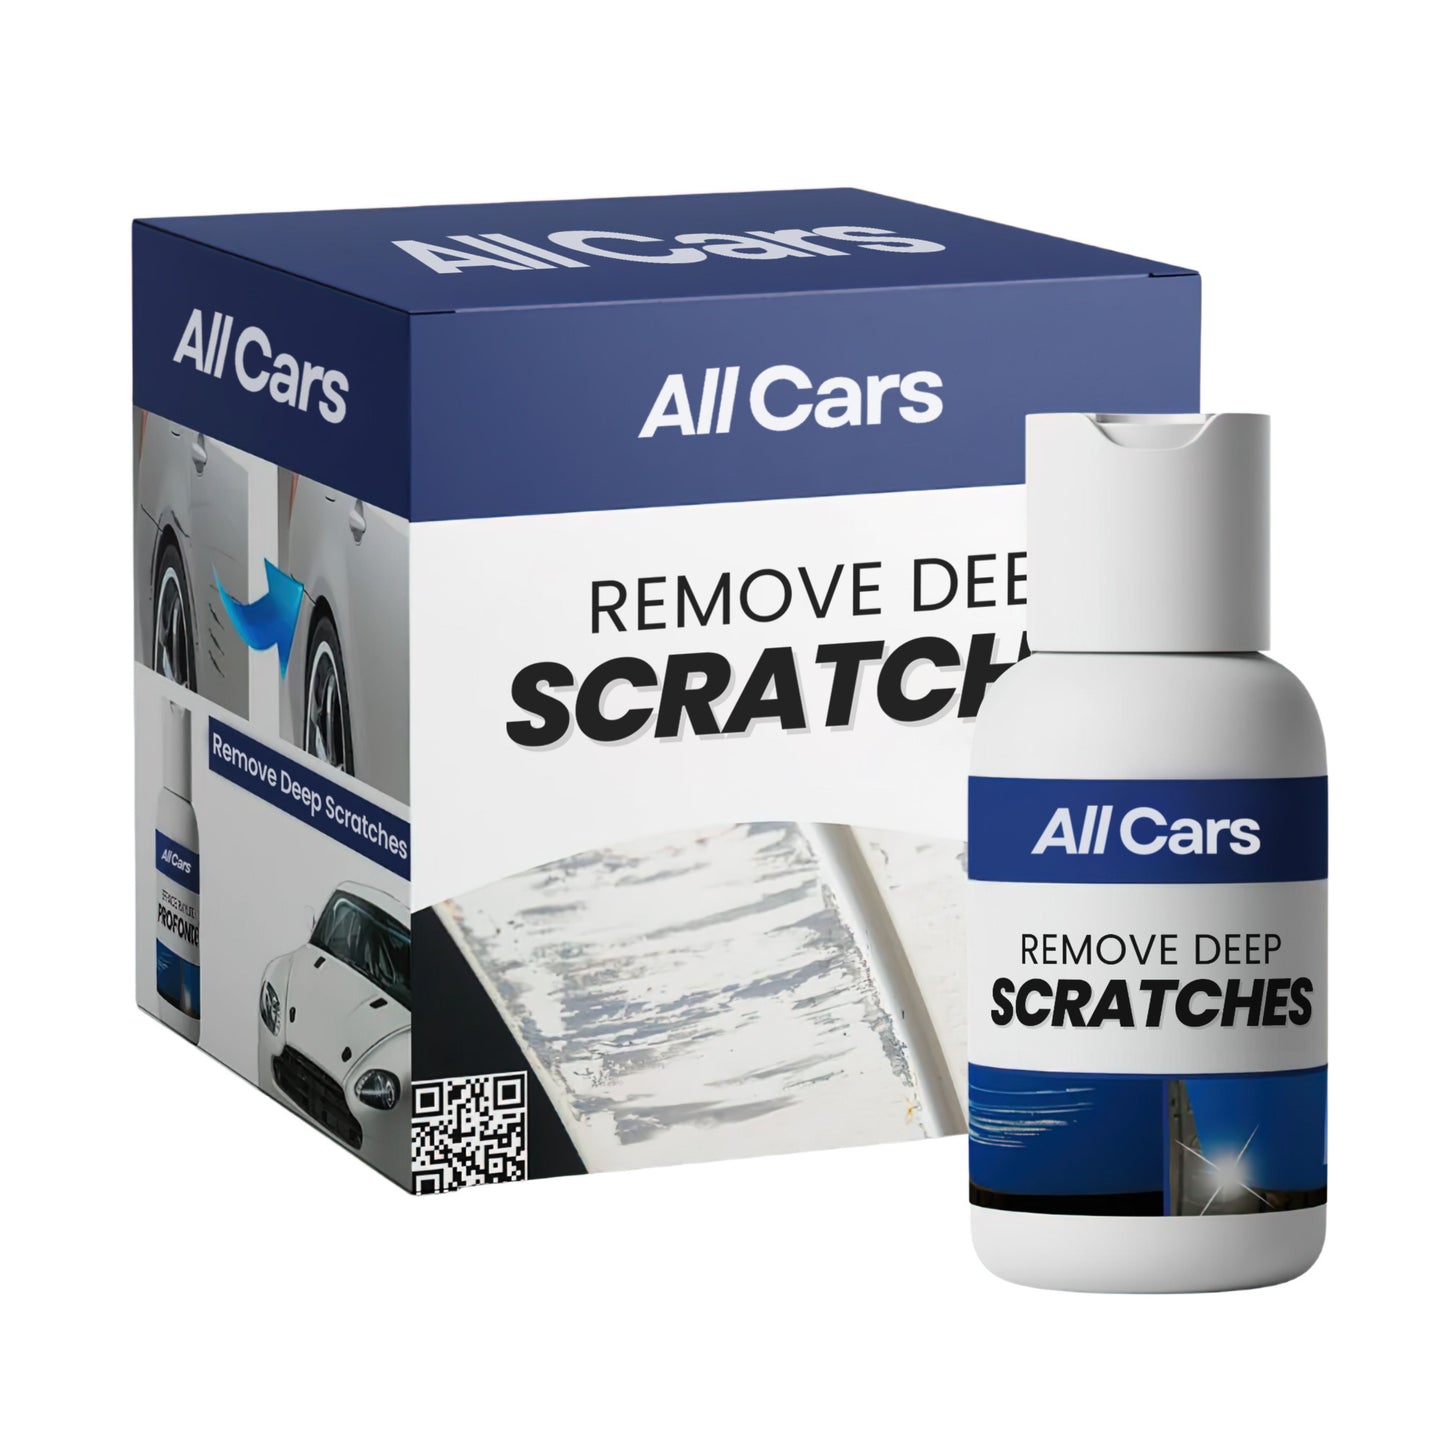 The Deep Scratch Remover | All Cars™